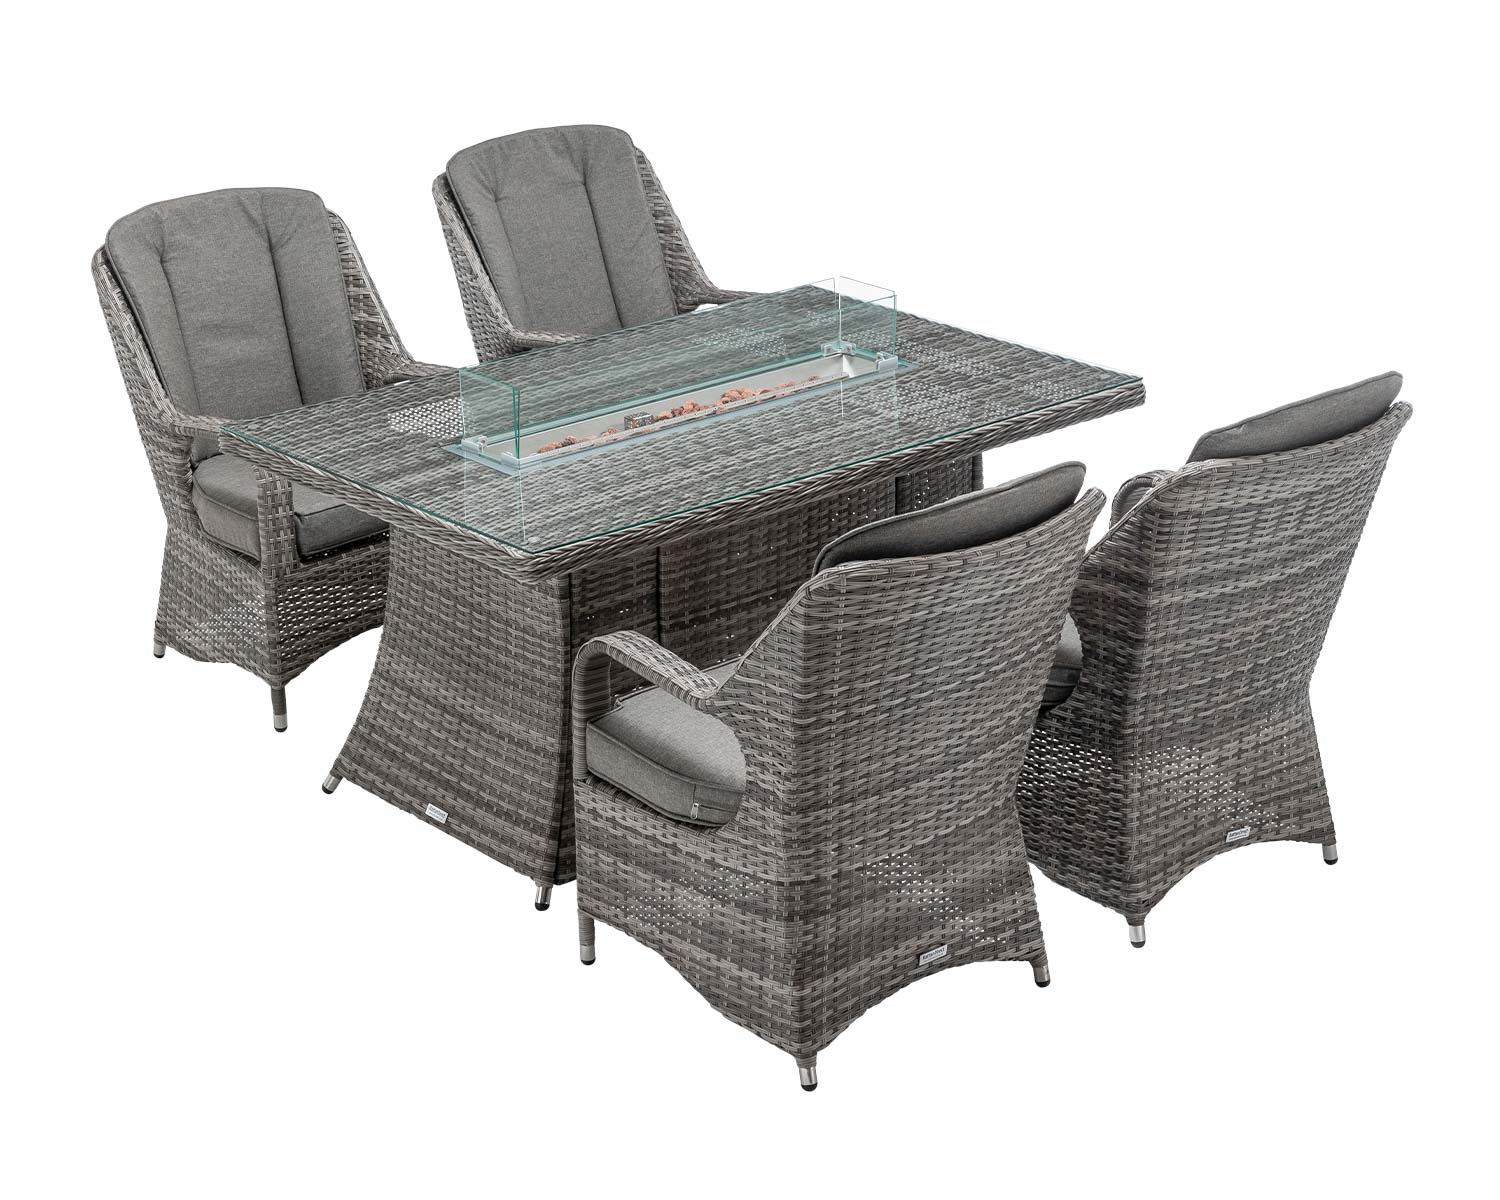 4 Seat Rattan Garden Dining Set With Rectangular Table In Grey With Fire Pit Marseille Rattan Direct